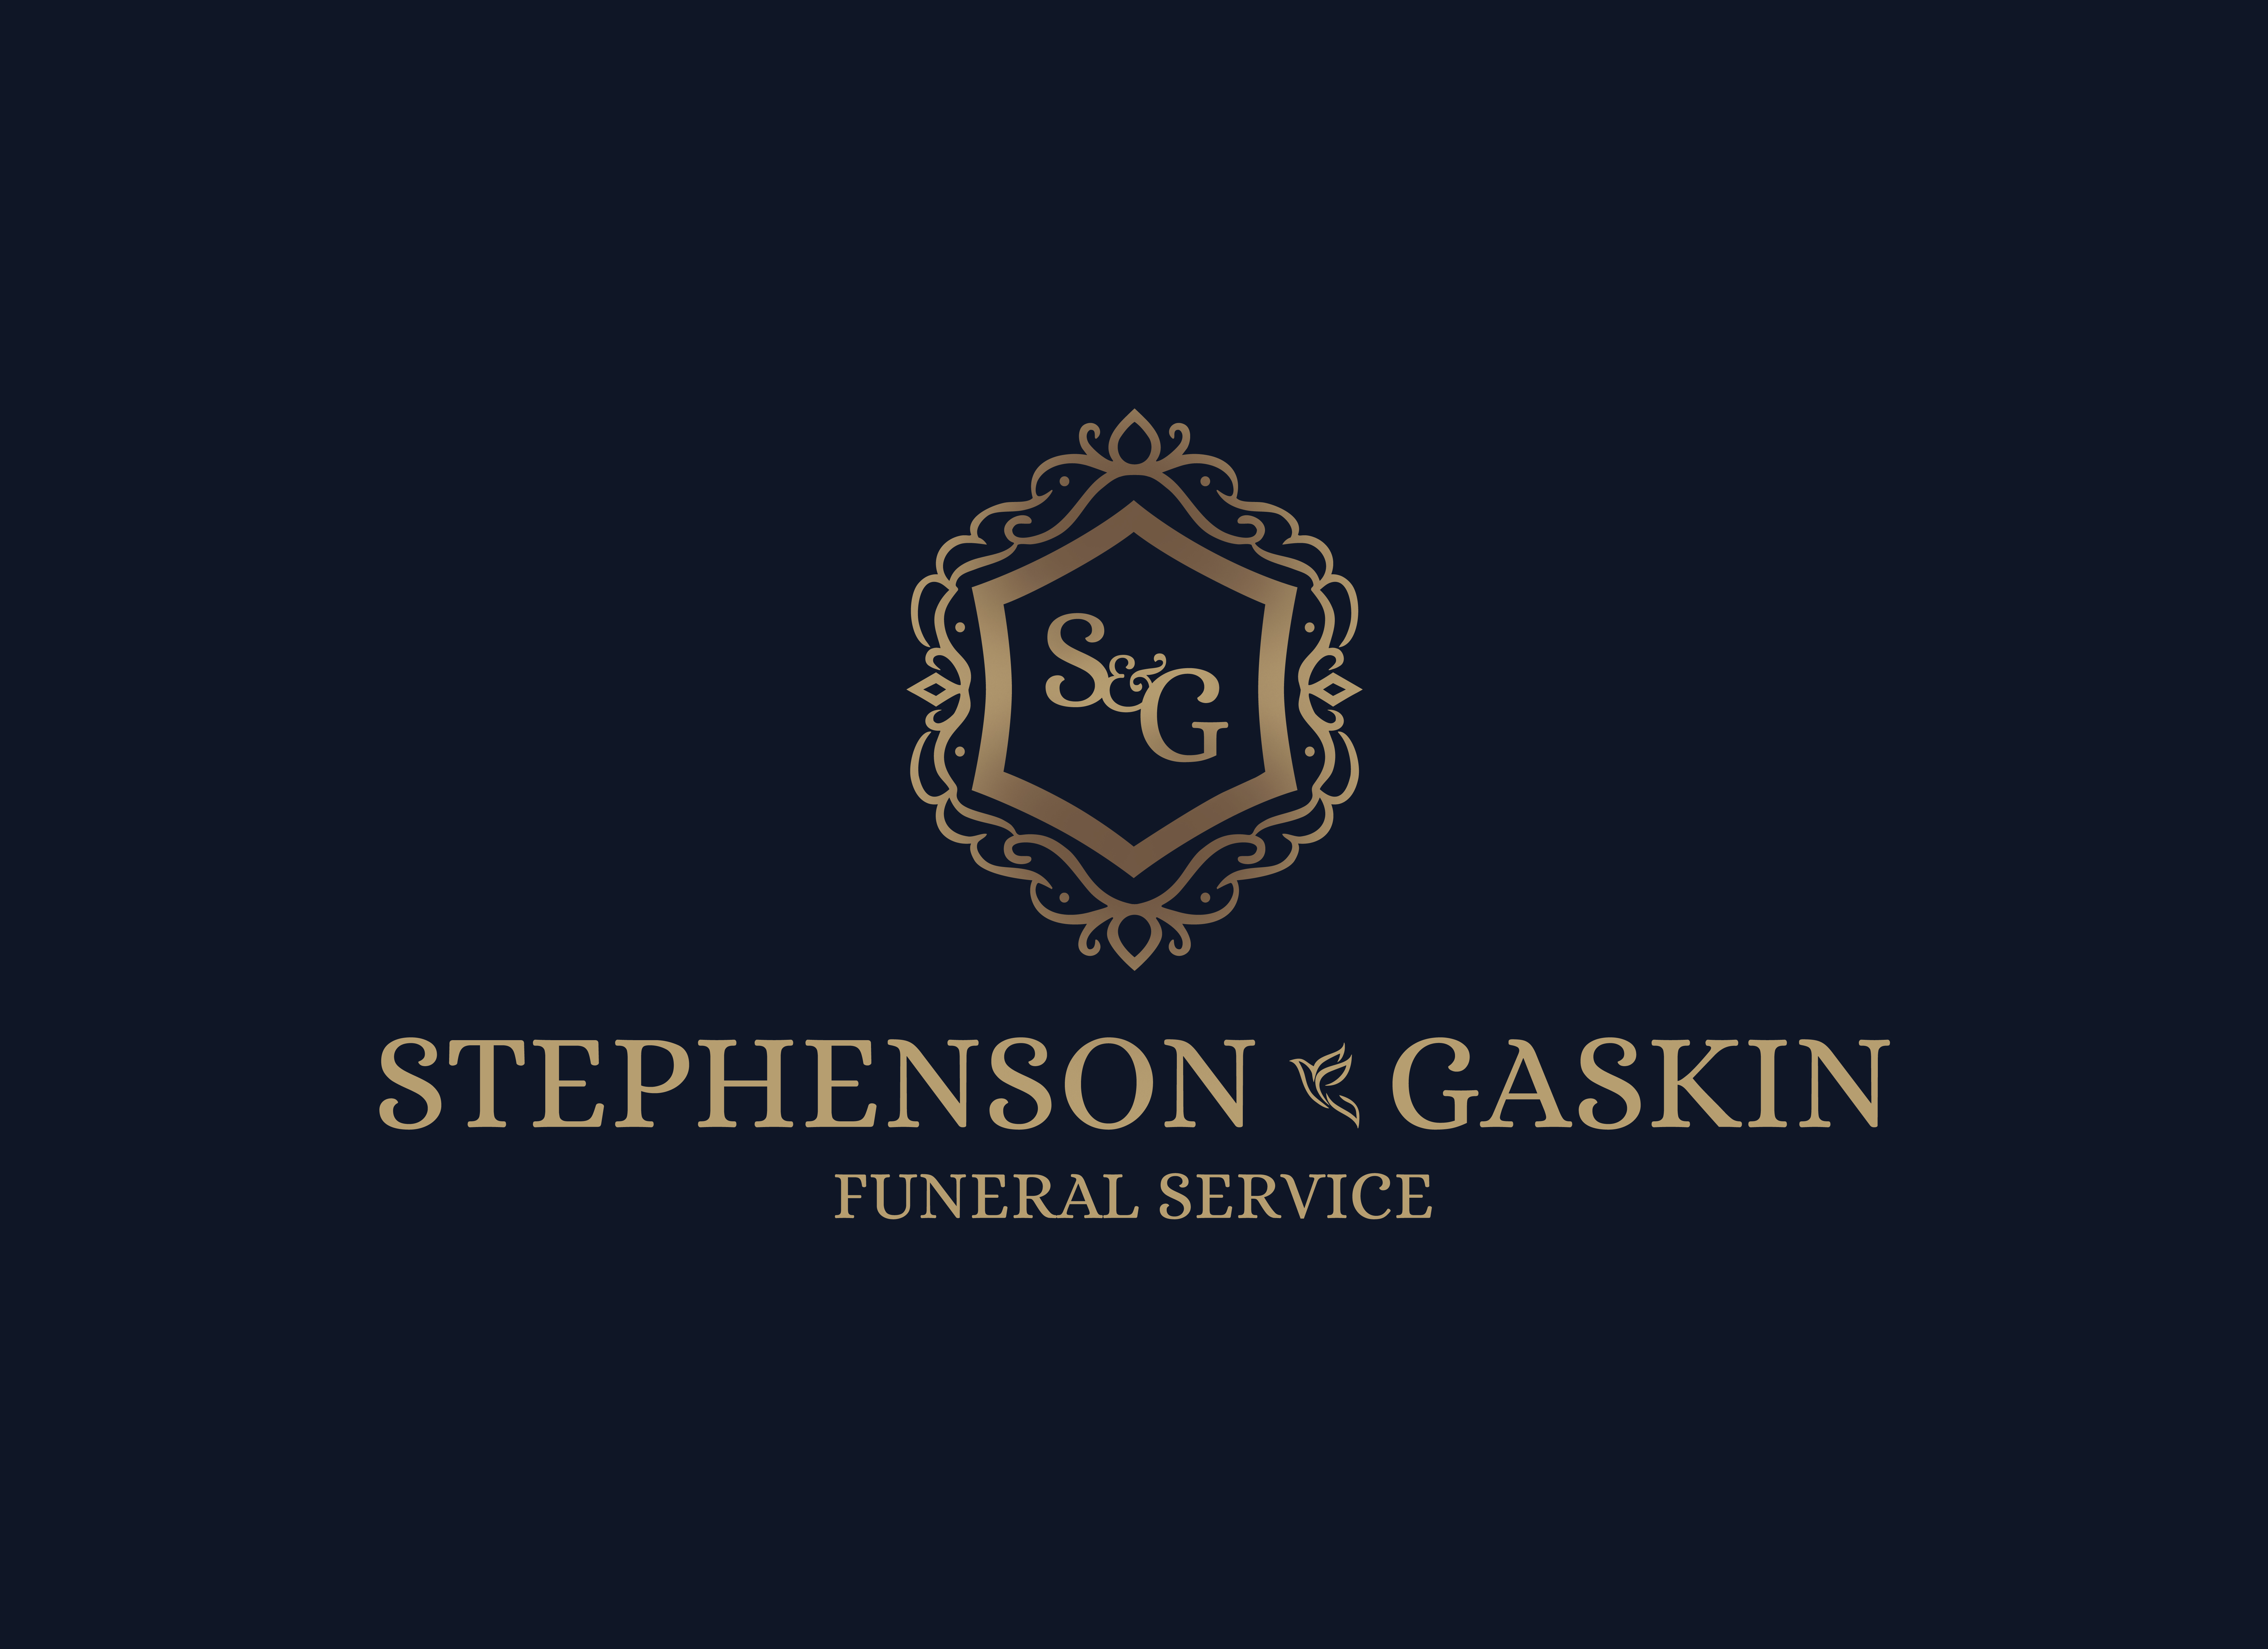 Gaskin Funeral Services Logo